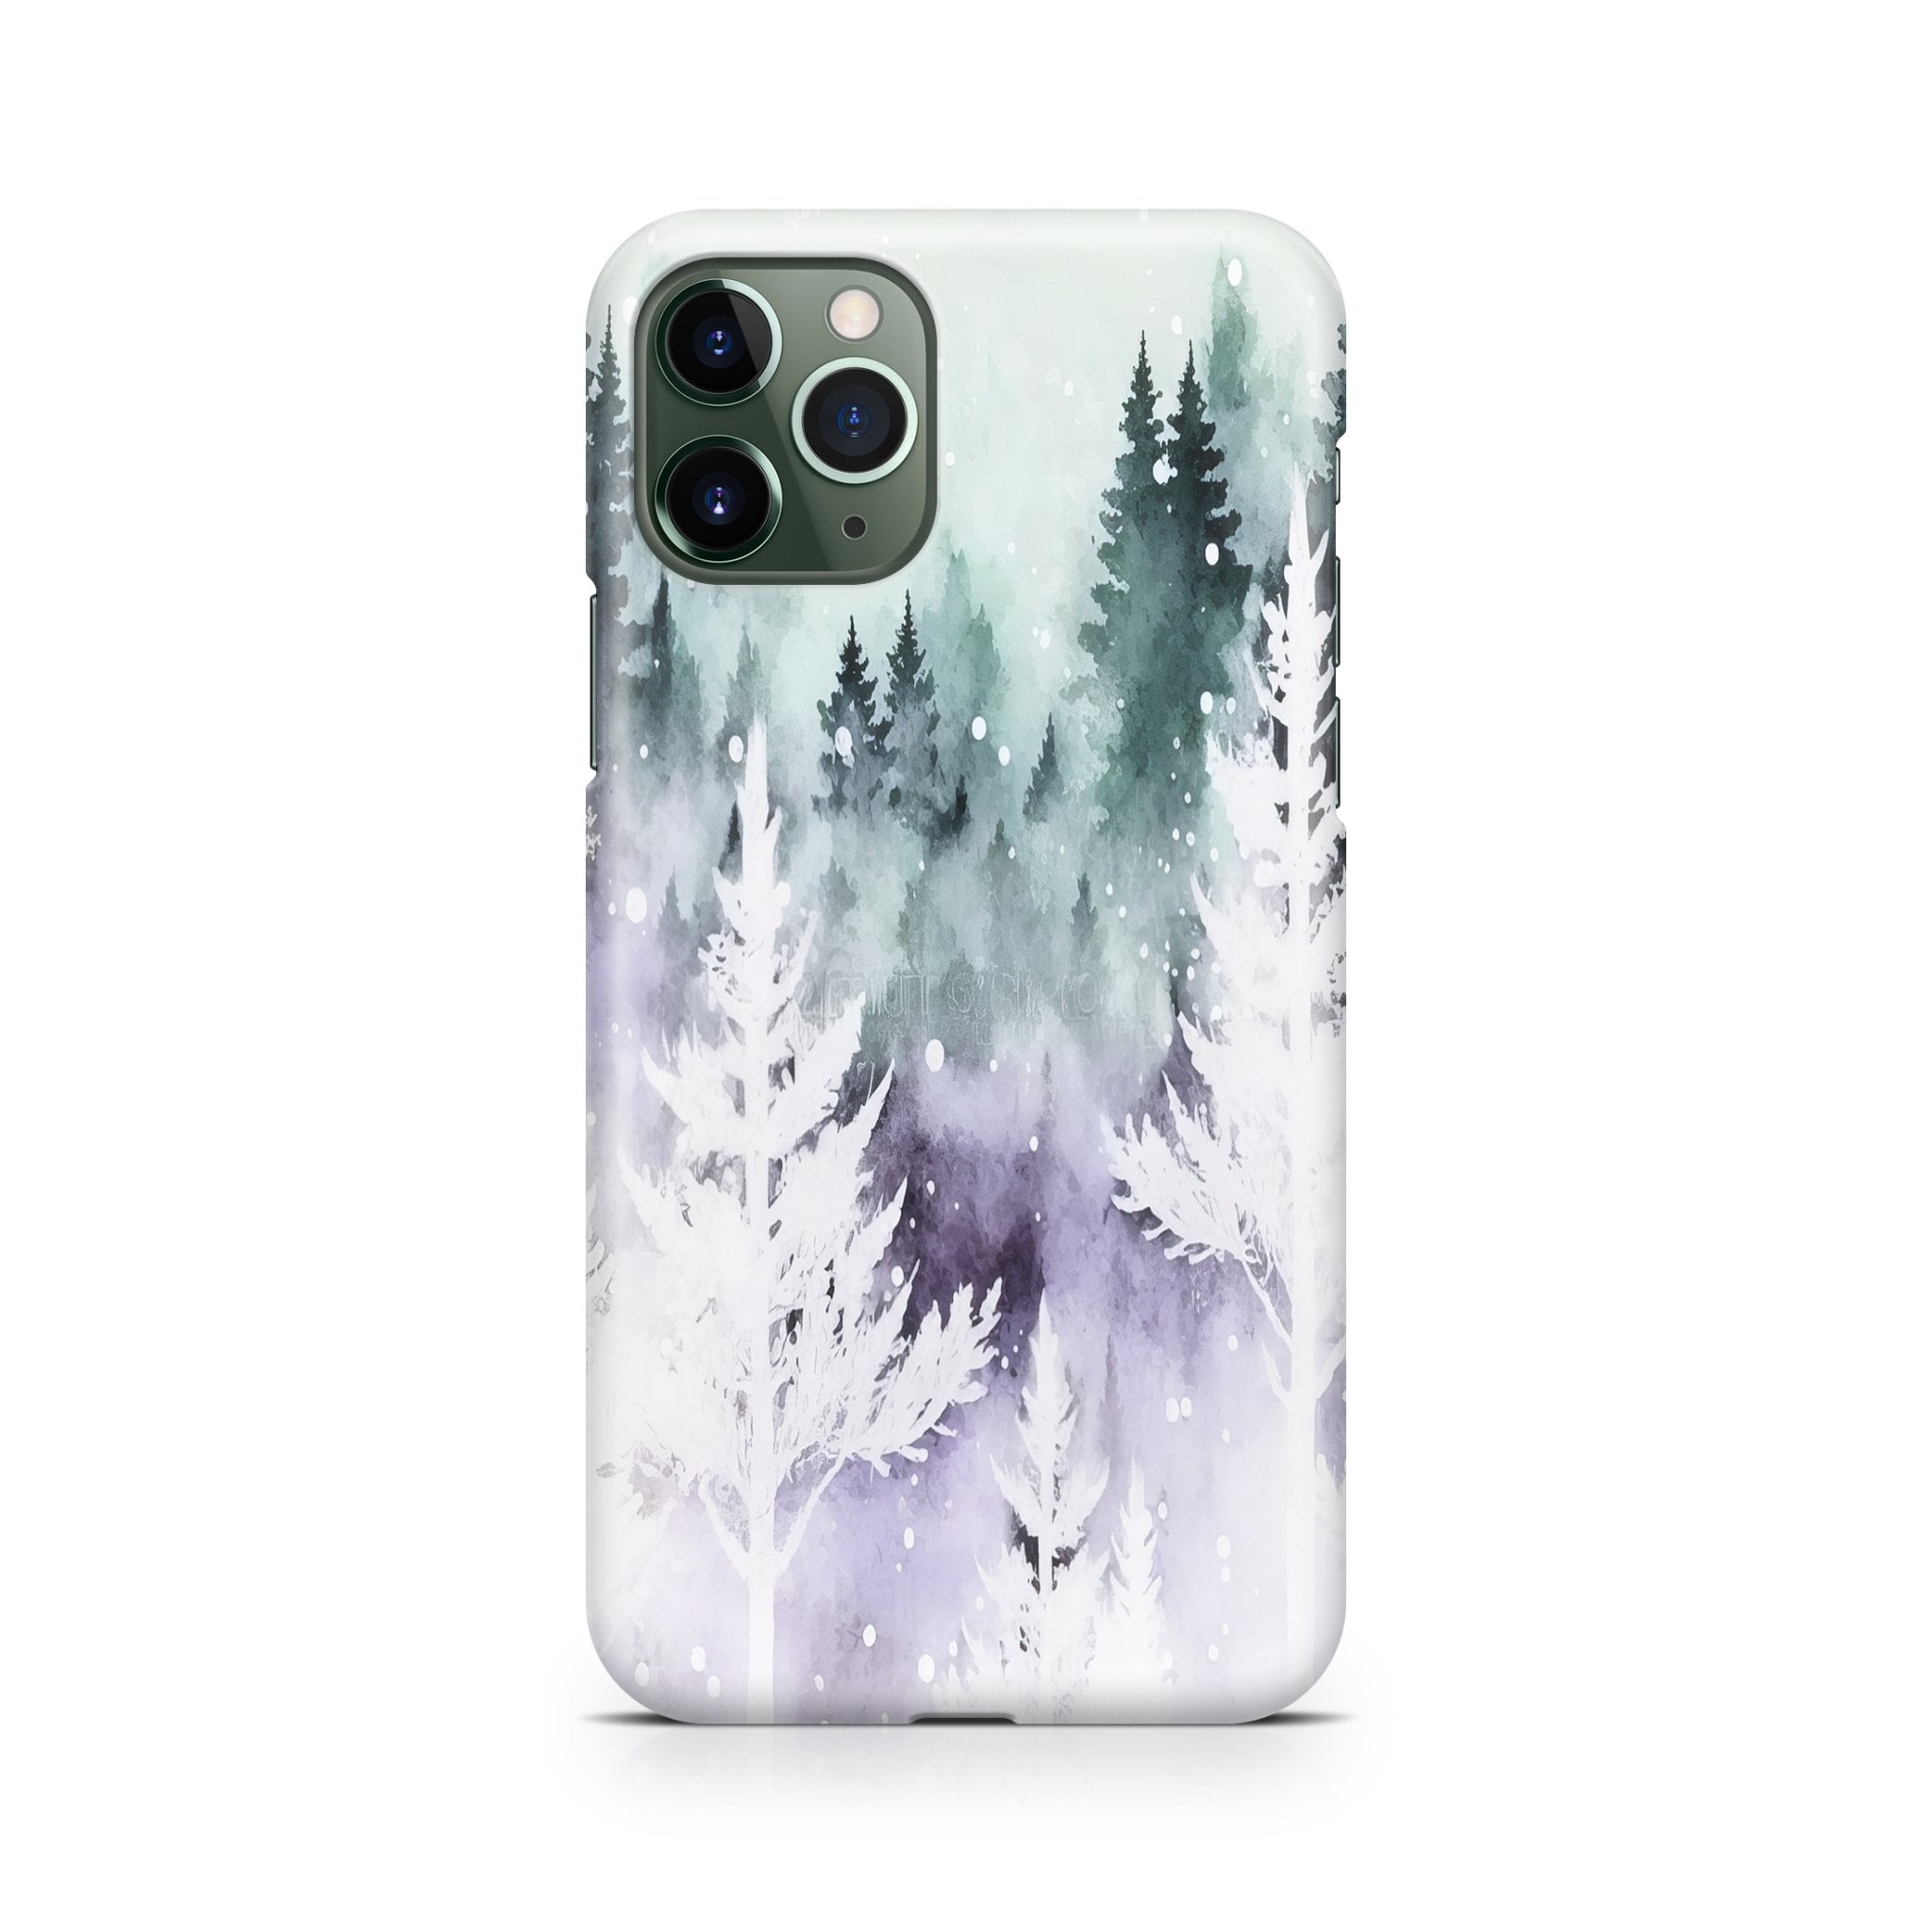 Cloudy Forest - iPhone phone case designs by CaseSwagger